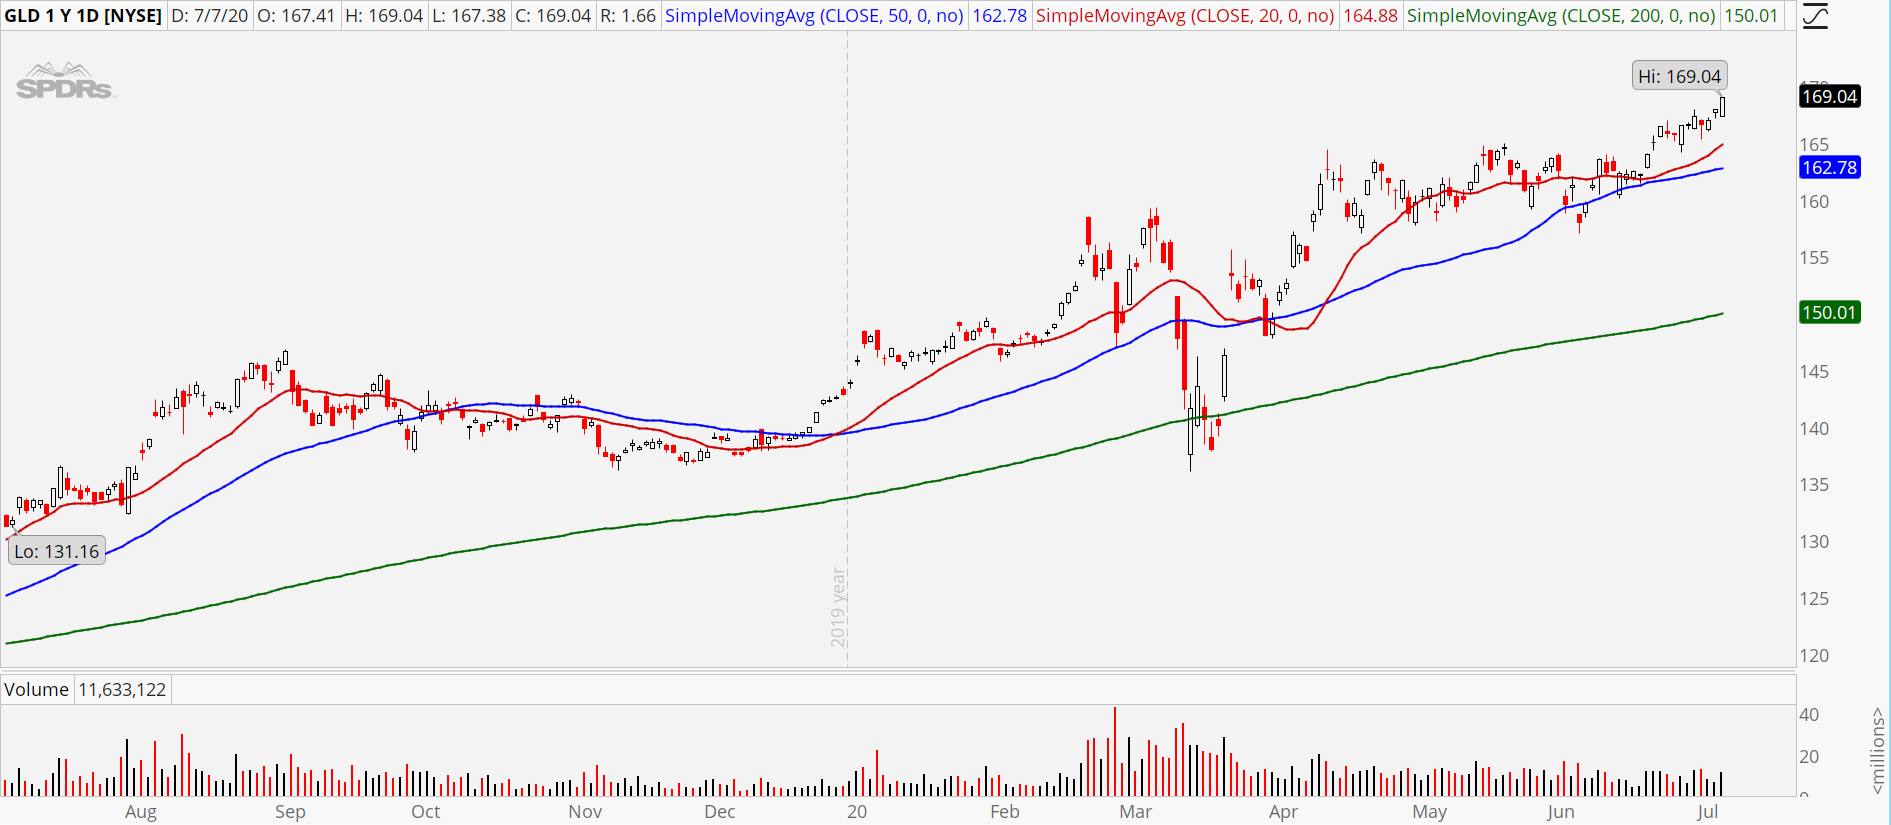 Gold ETF (GLD) stock chart showing strong uptrend